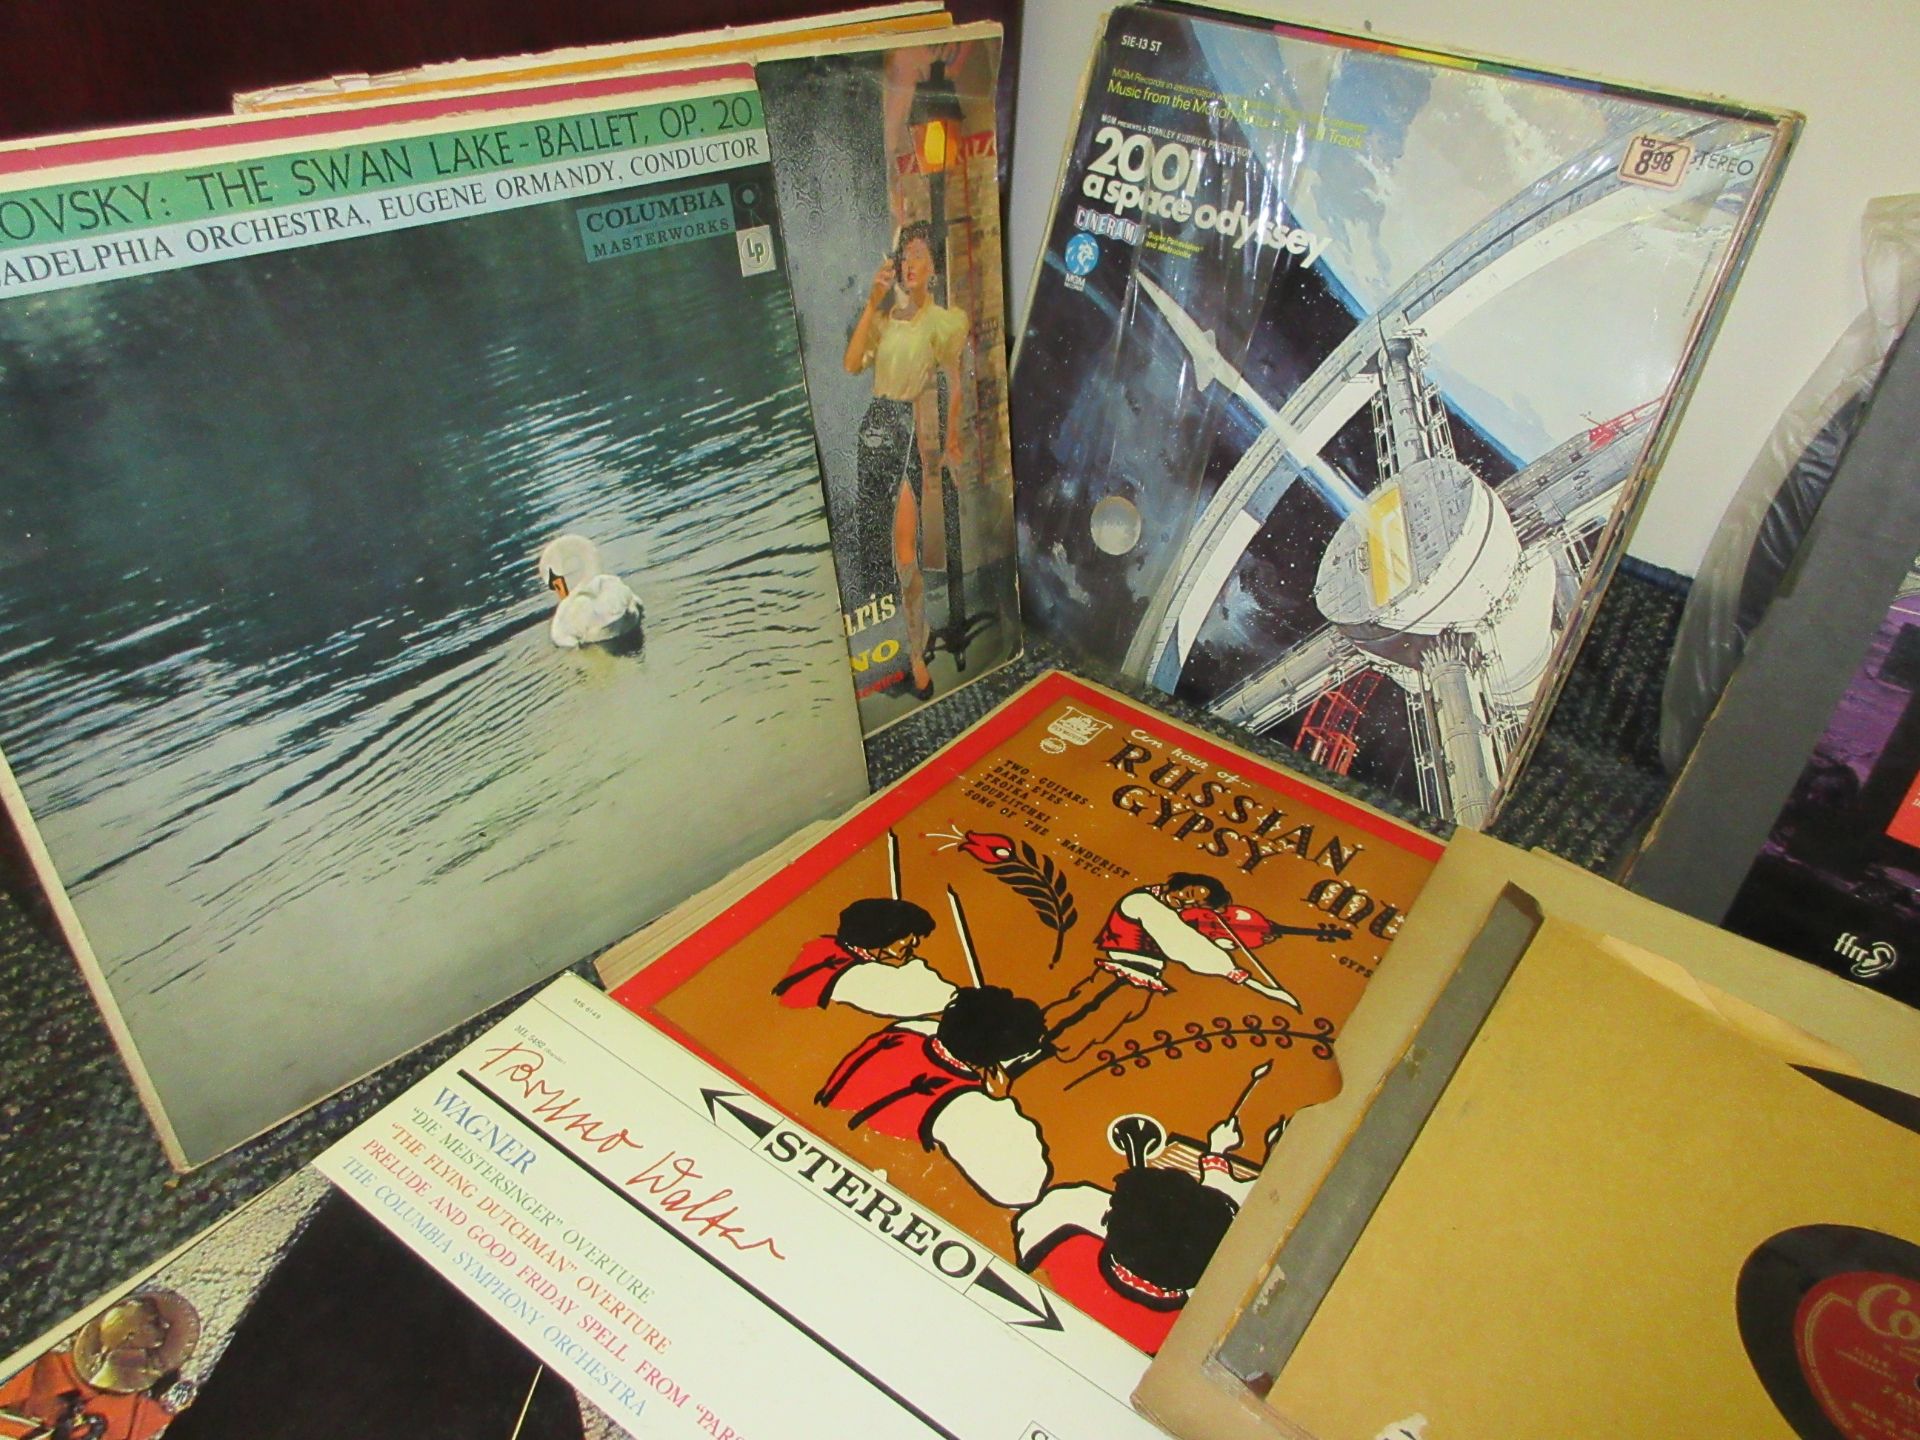 LOT OF ASSORTED MUSIC VINYLS (80 PIECES) - SPEED 33 1/3 , ETC. - Image 4 of 4